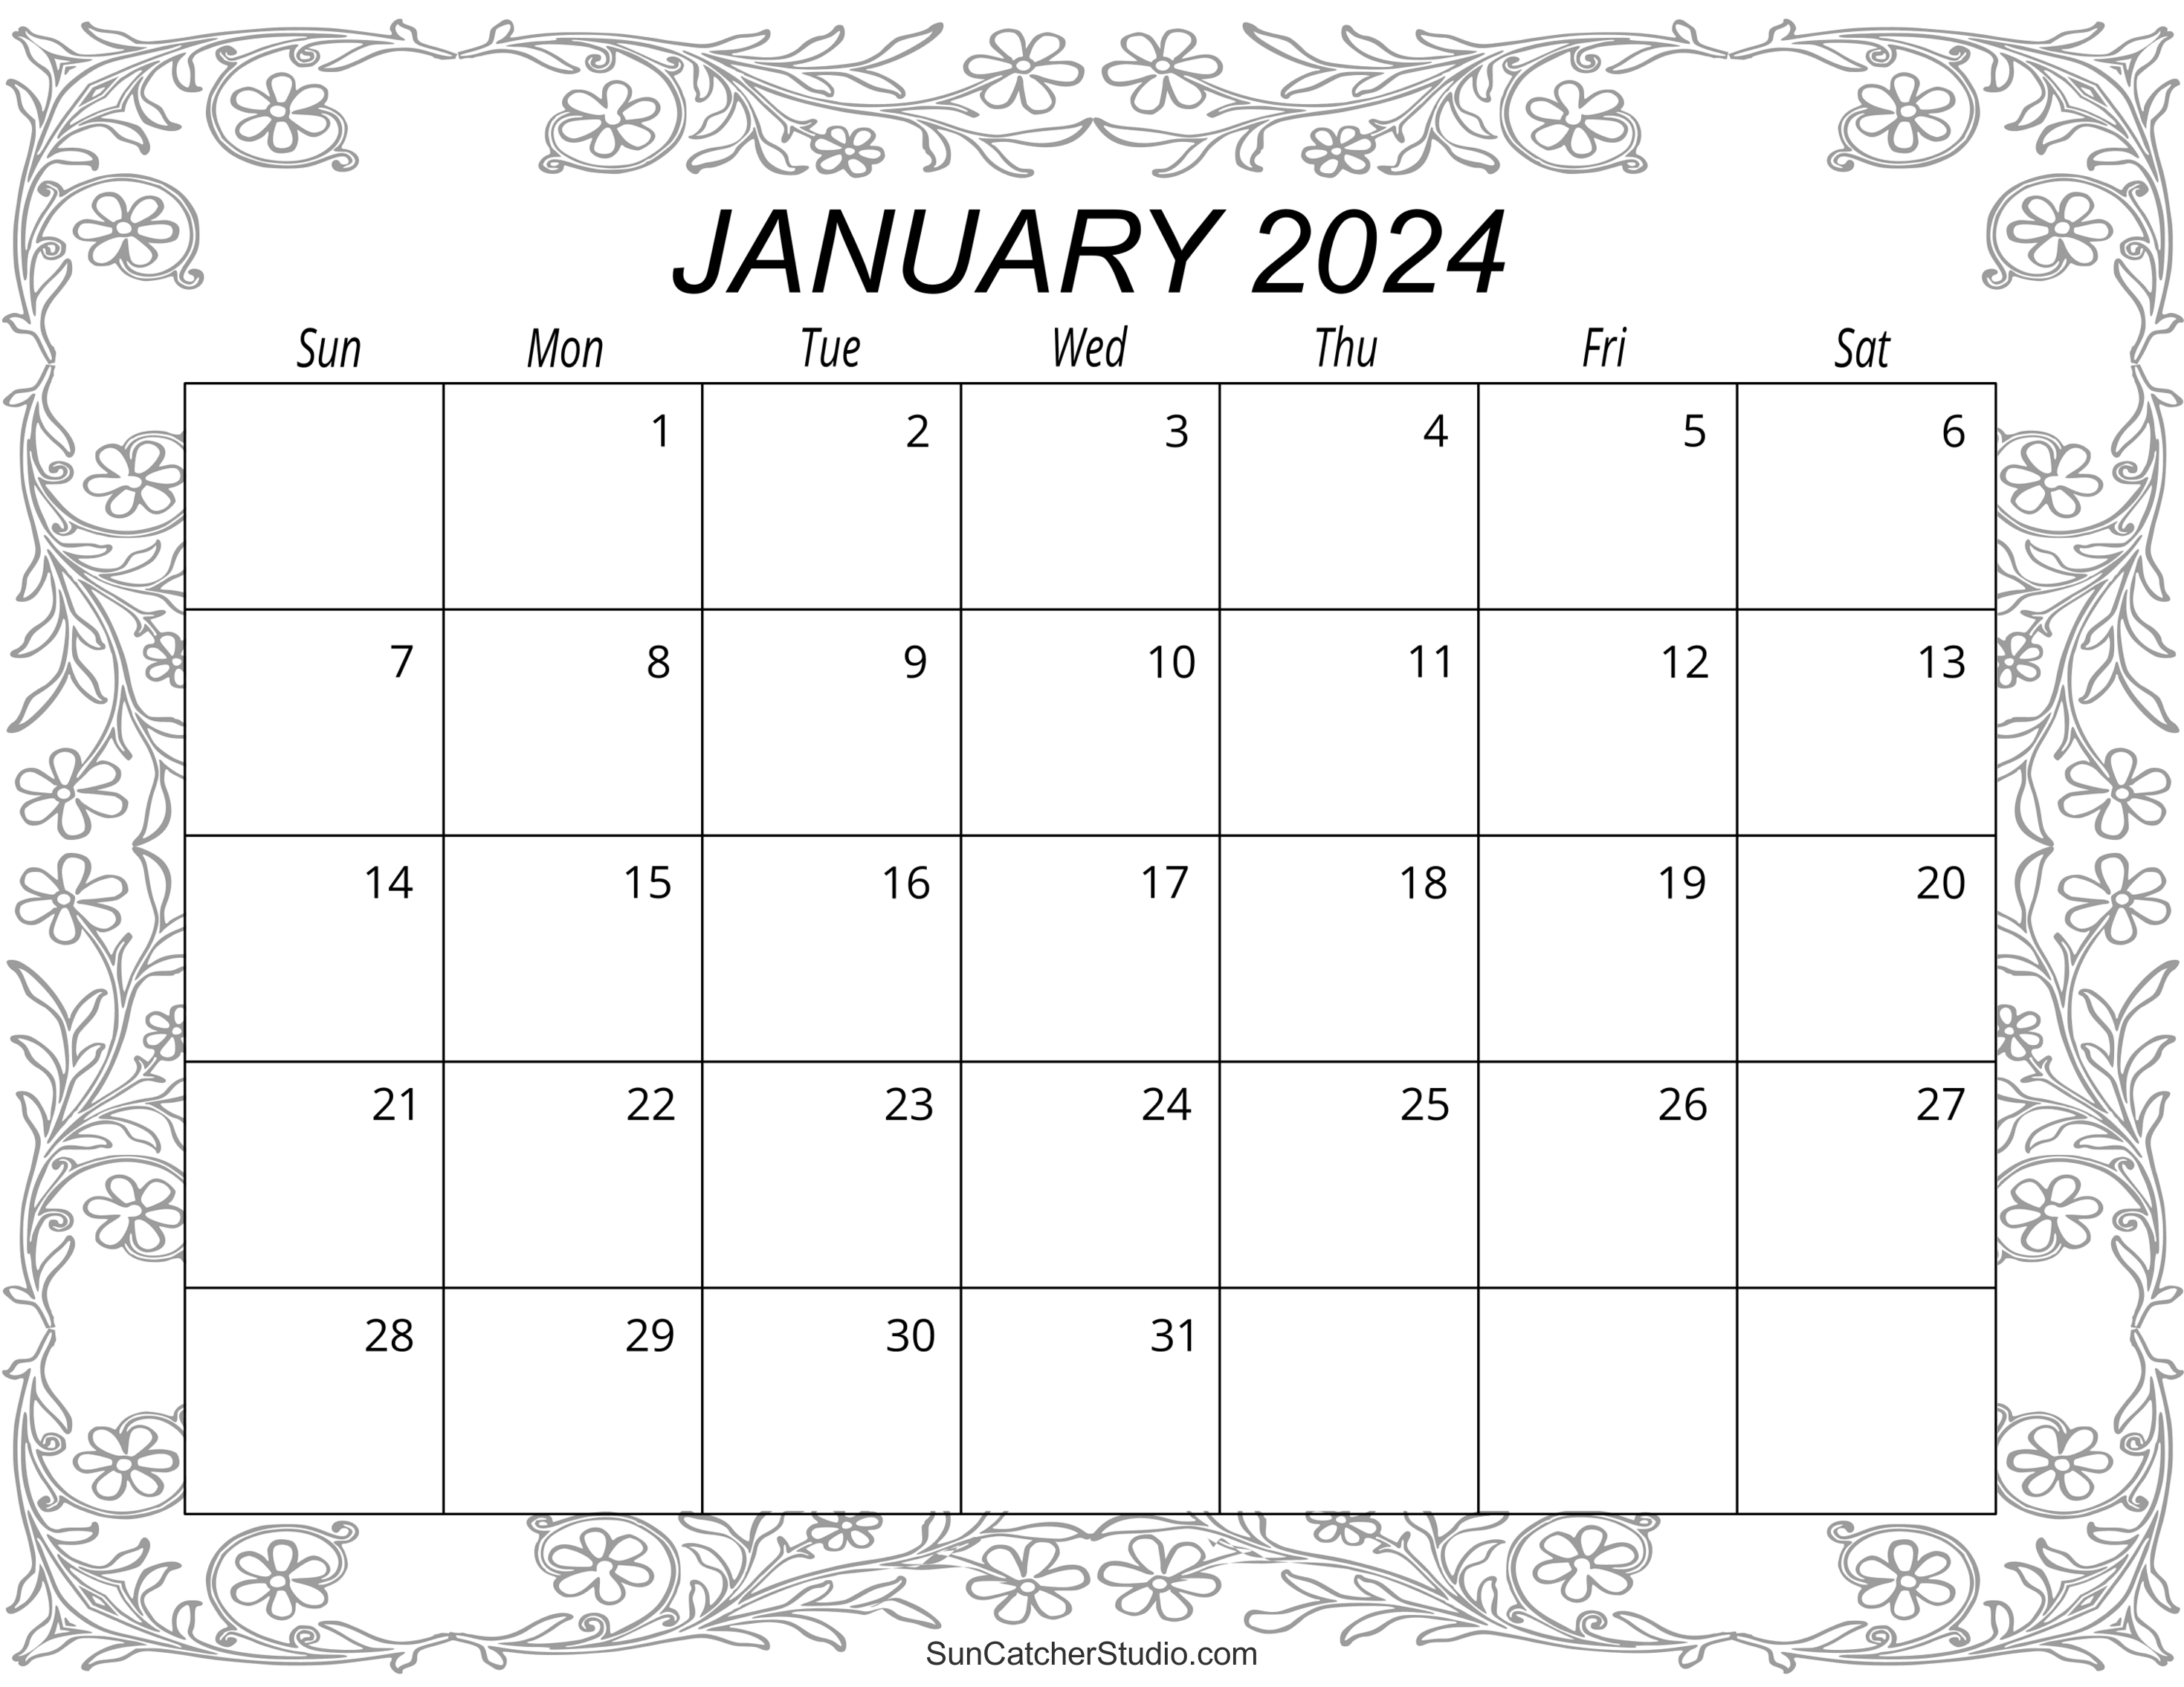 january-2024-calendar-free-printable-diy-projects-patterns